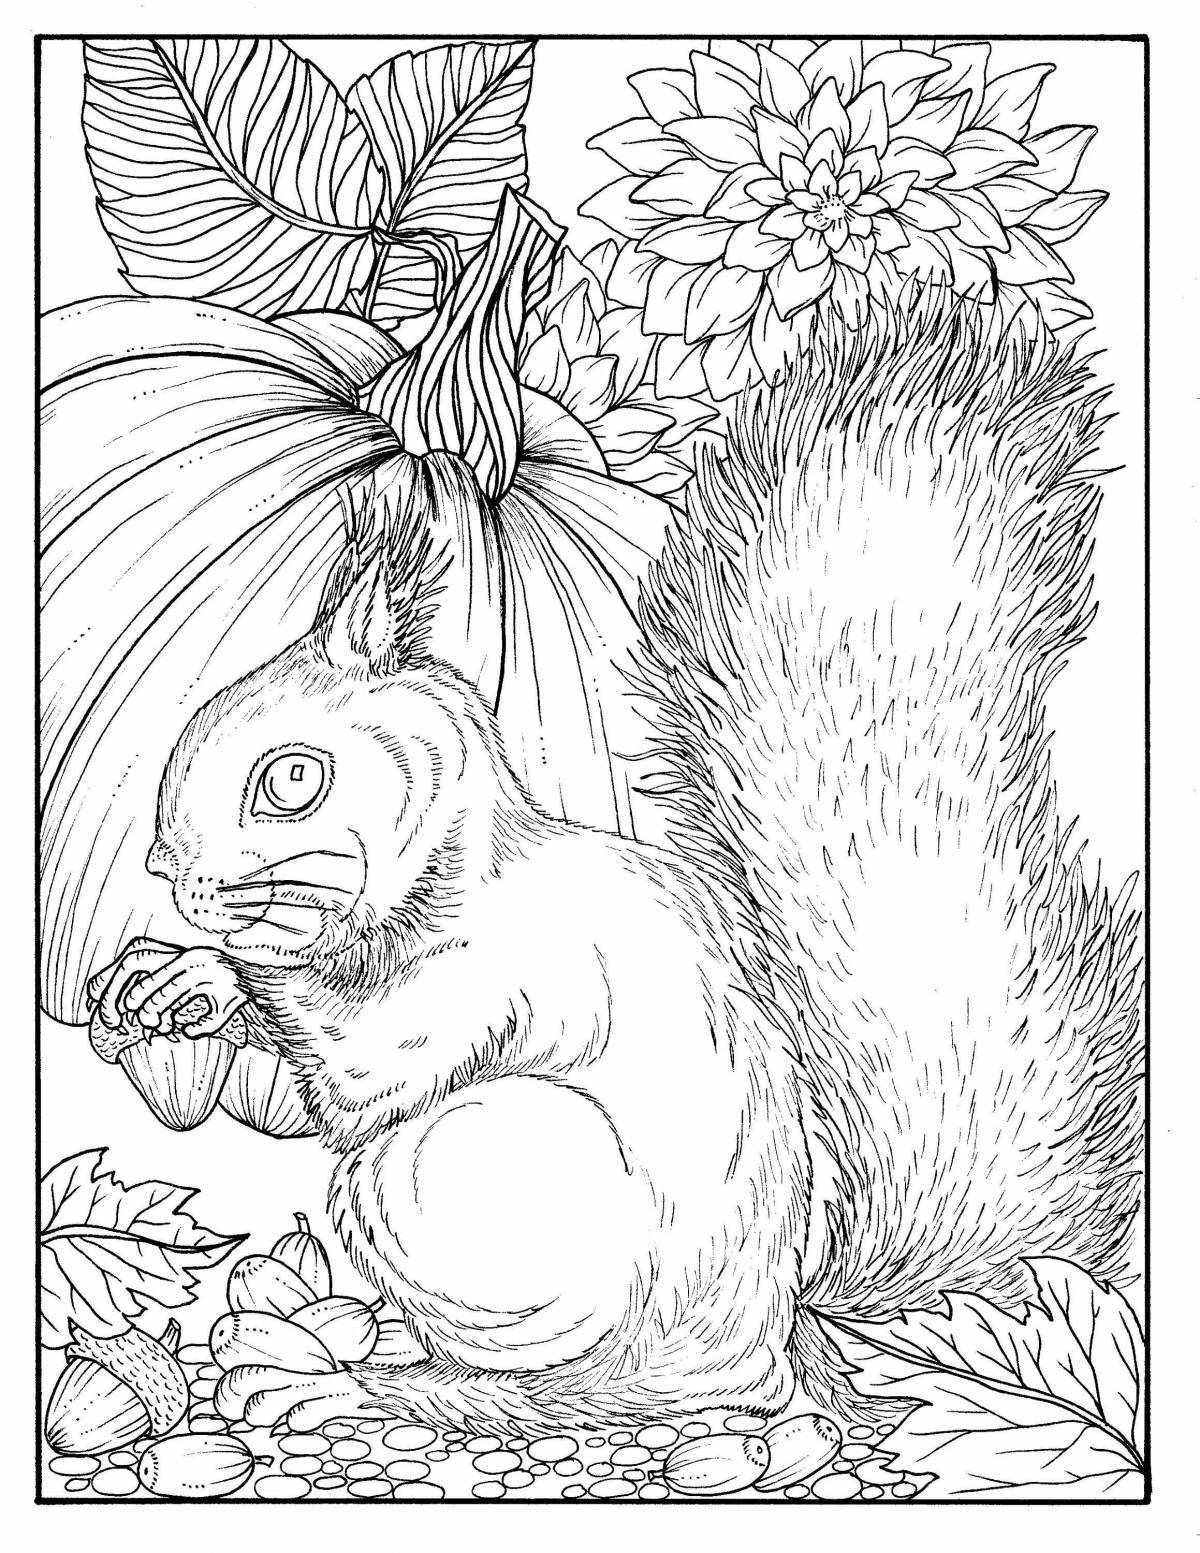 Coloring book playful winter squirrel